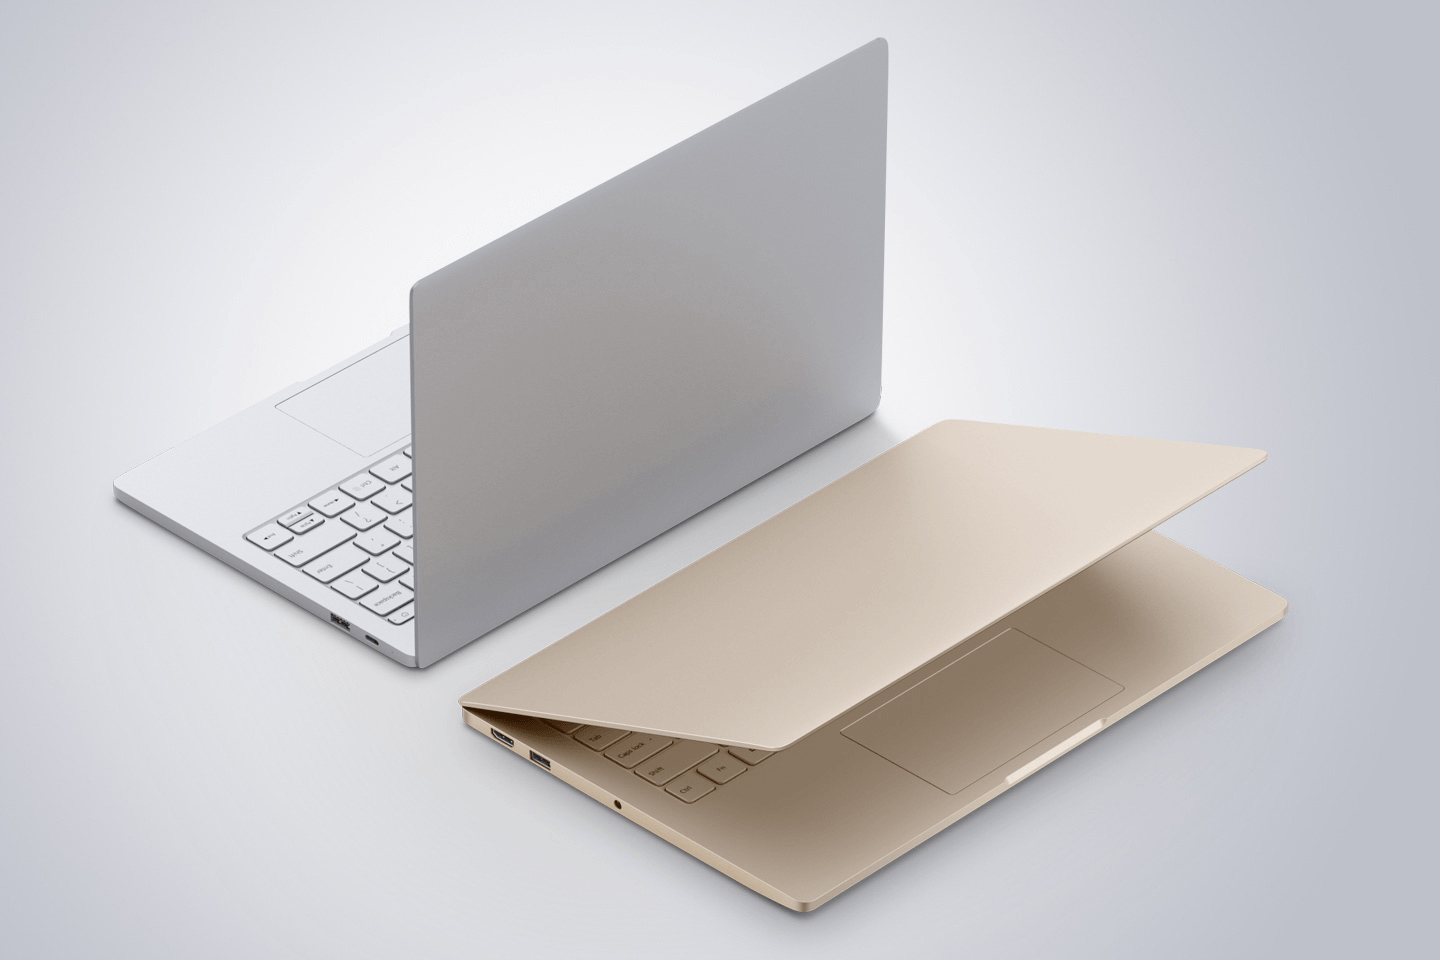 Xiaomi Mi Notebook Air With 4G LTE To Launch Soon